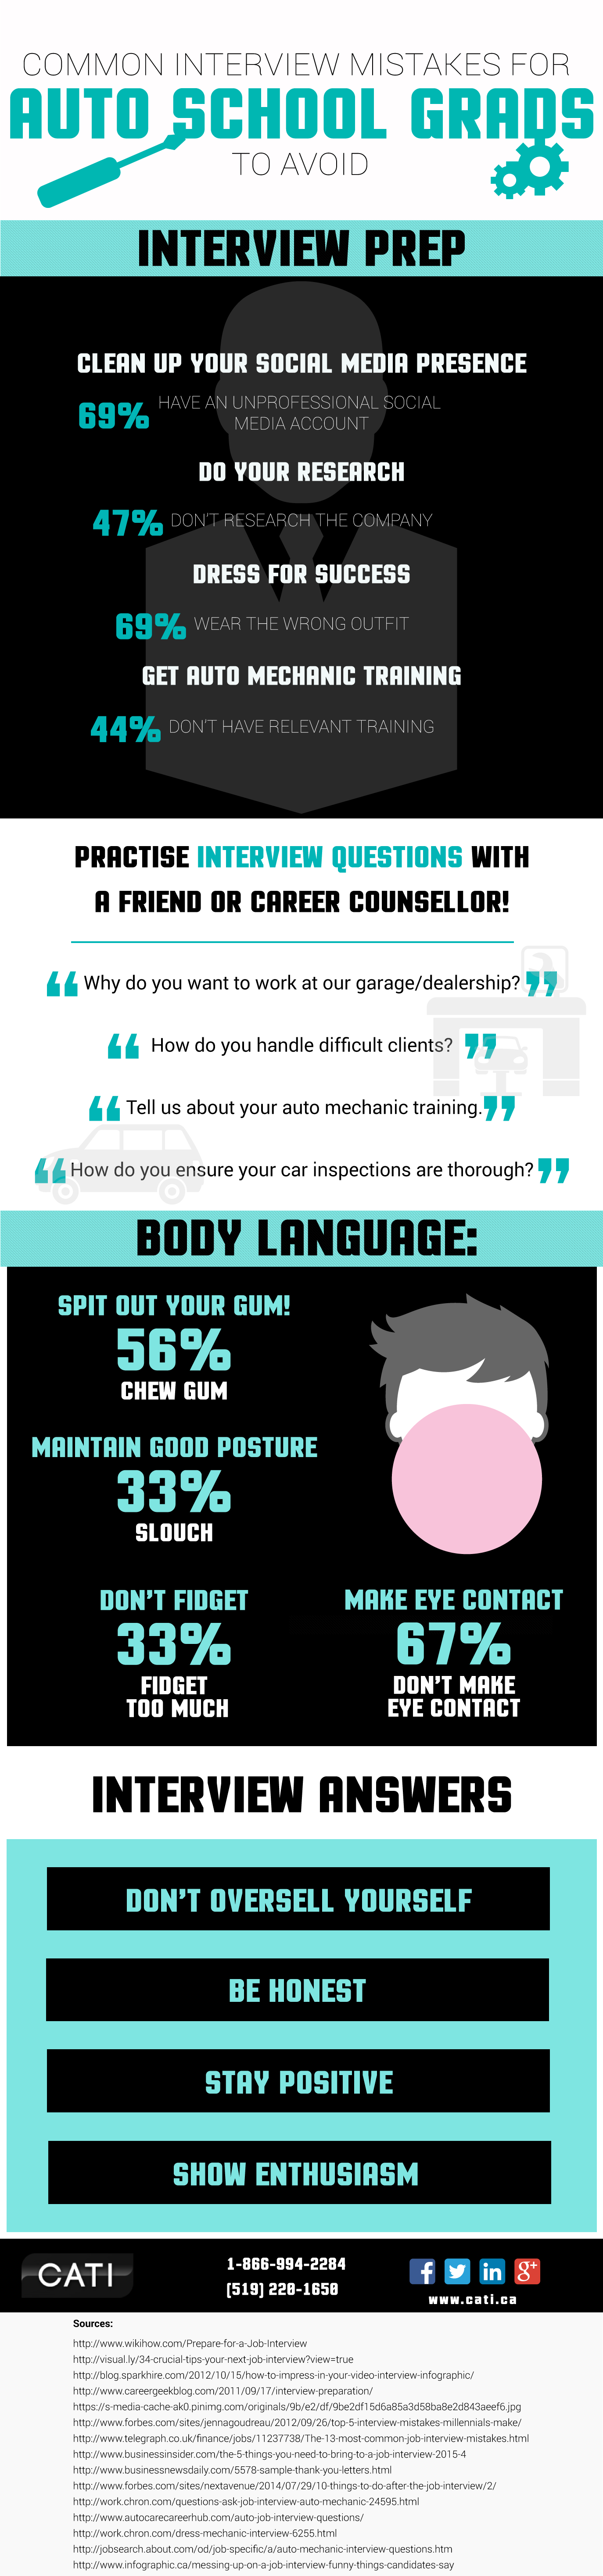 [Infographic]: Common Interview Mistakes for Auto School Grads to Avoid